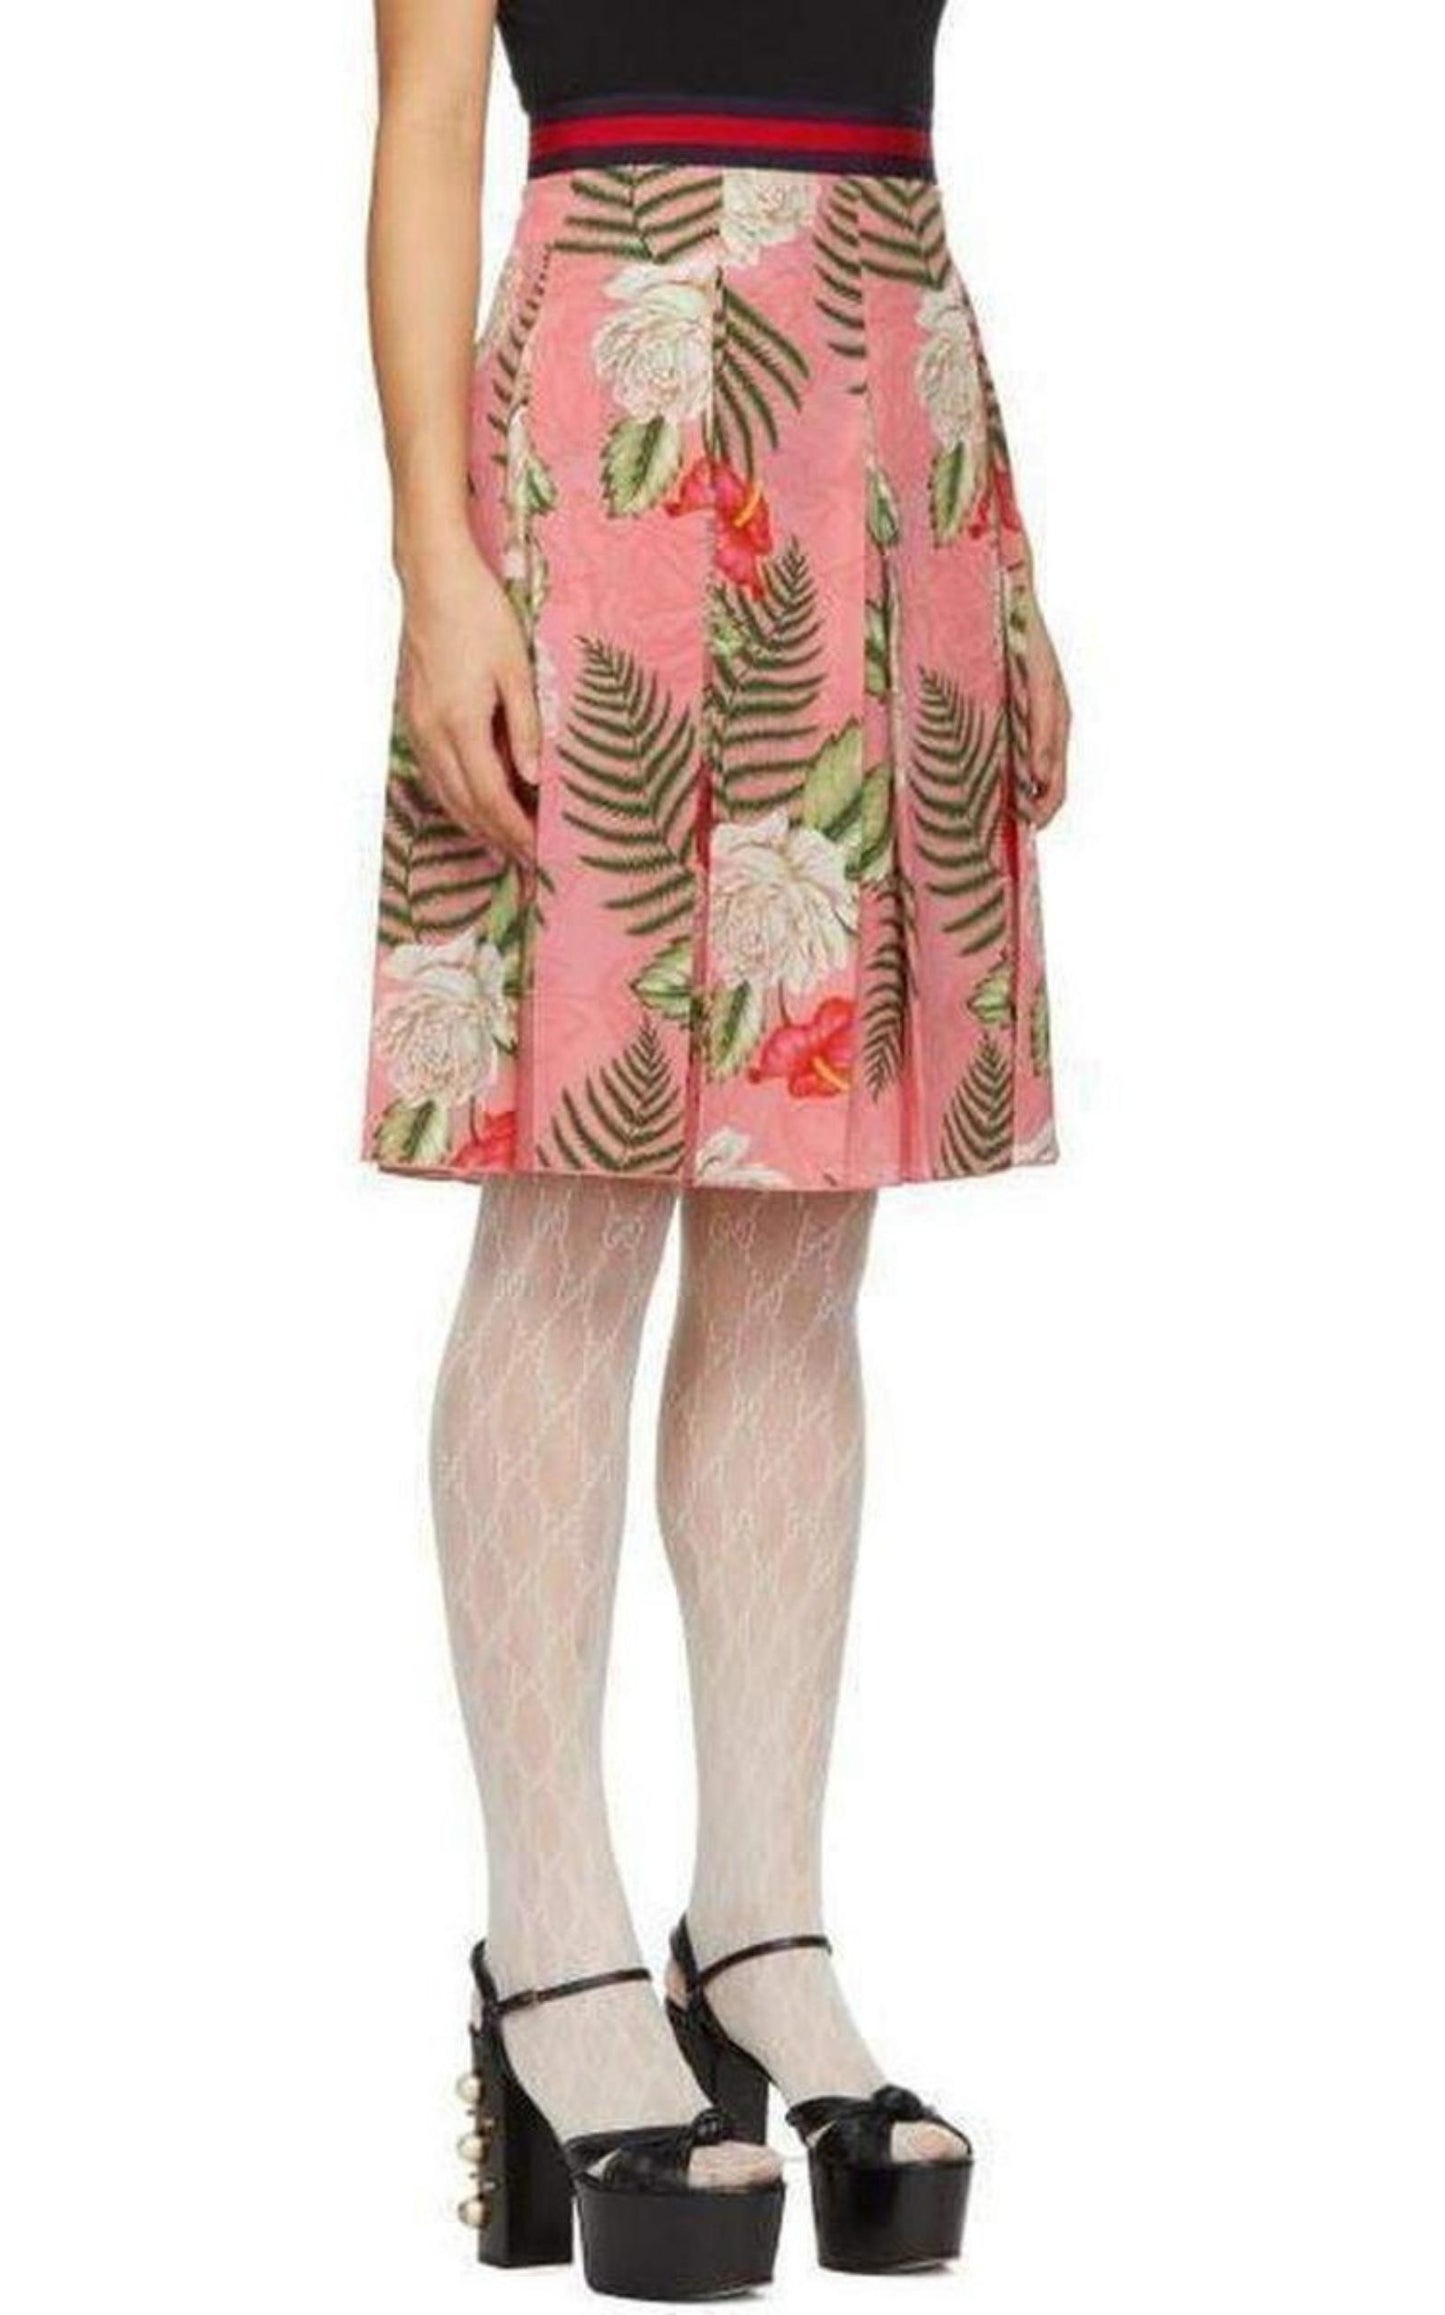  GucciPink Floral Pleated Mini Skirt - Runway Catalog